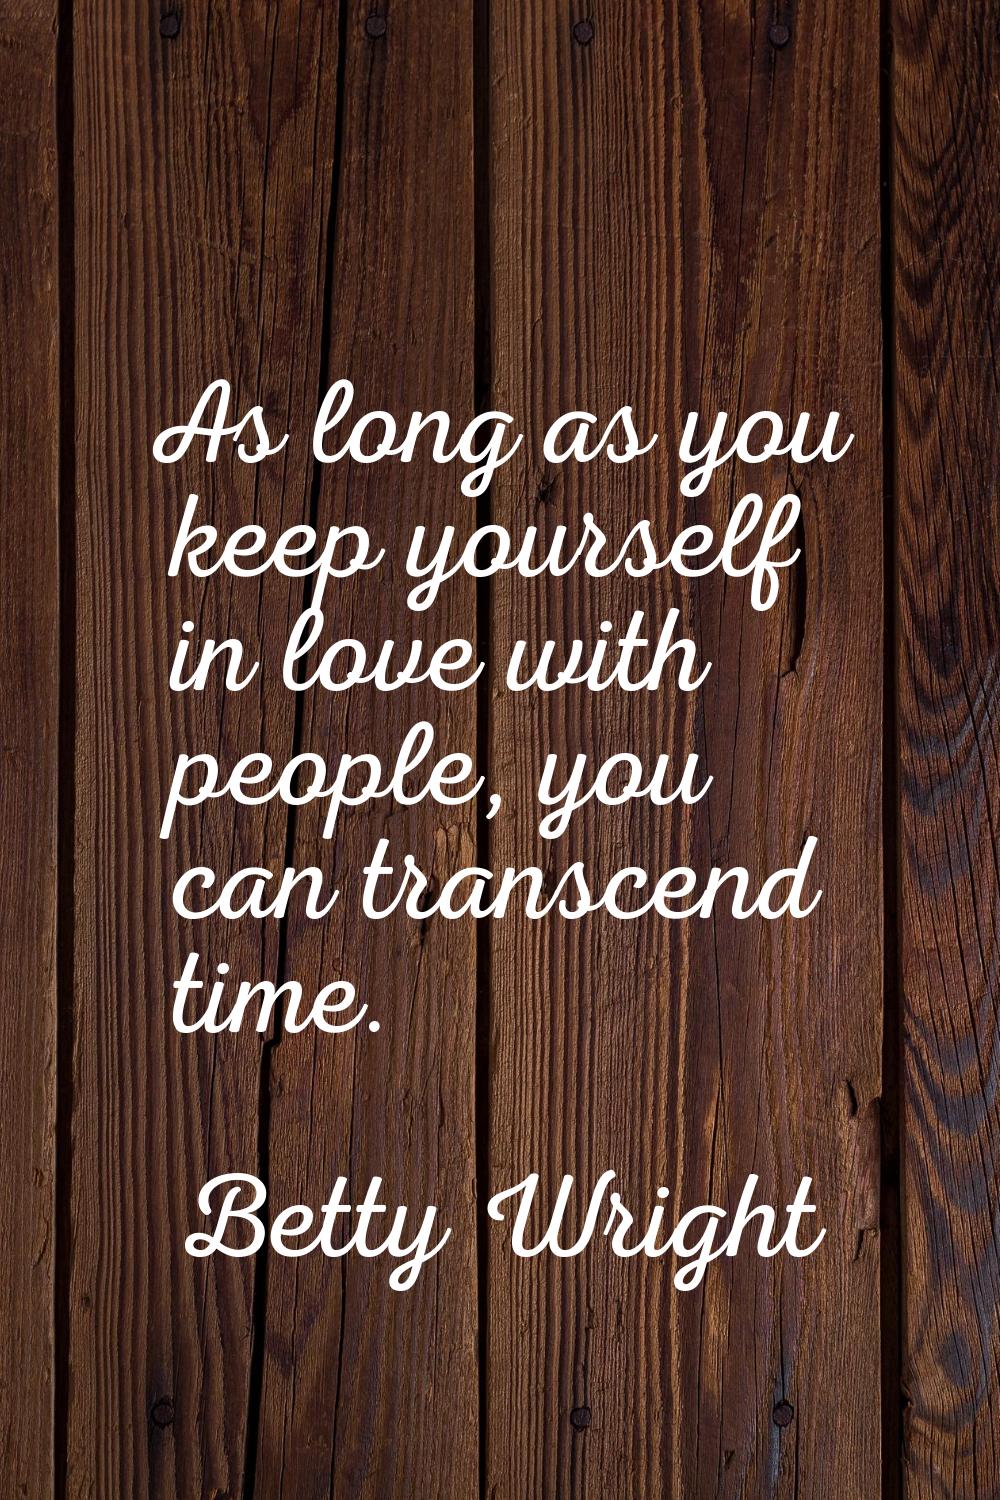 As long as you keep yourself in love with people, you can transcend time.